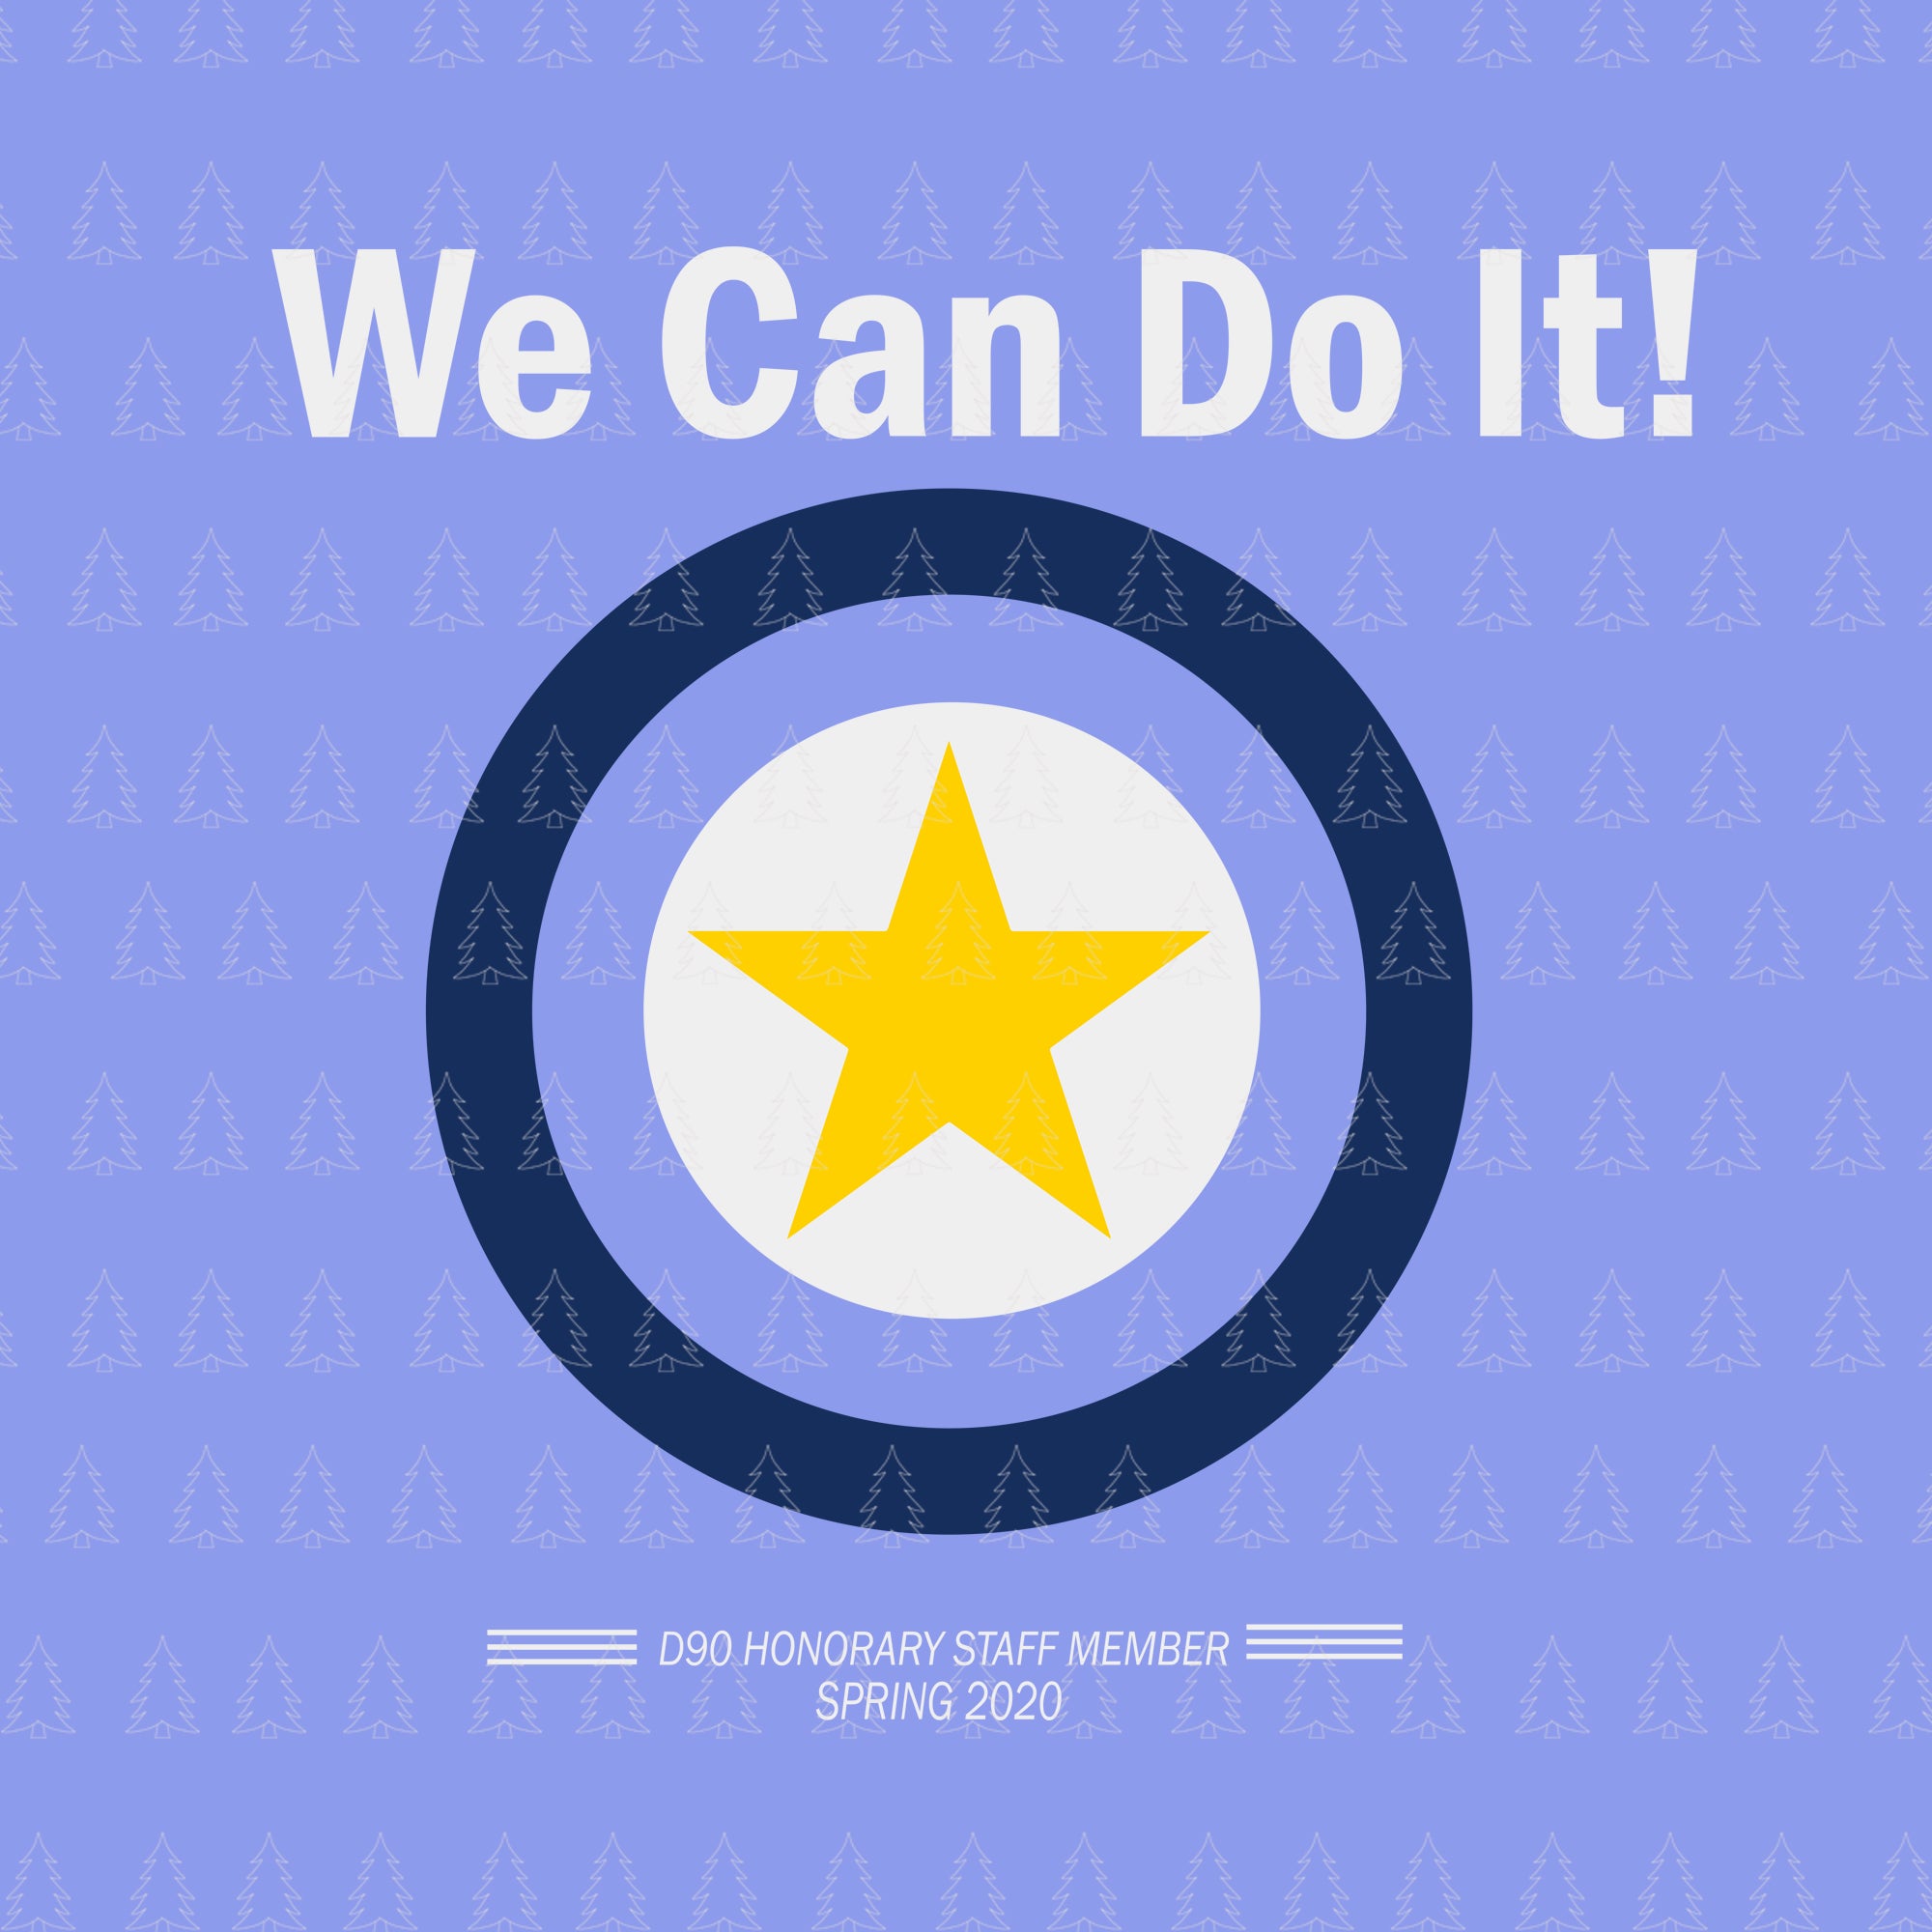 We can do it d90 staff spring 2020, we can do it d90 staff spring 2020 svg, we can do it d90 staff spring 2020 png, mens d90 staff we can do file